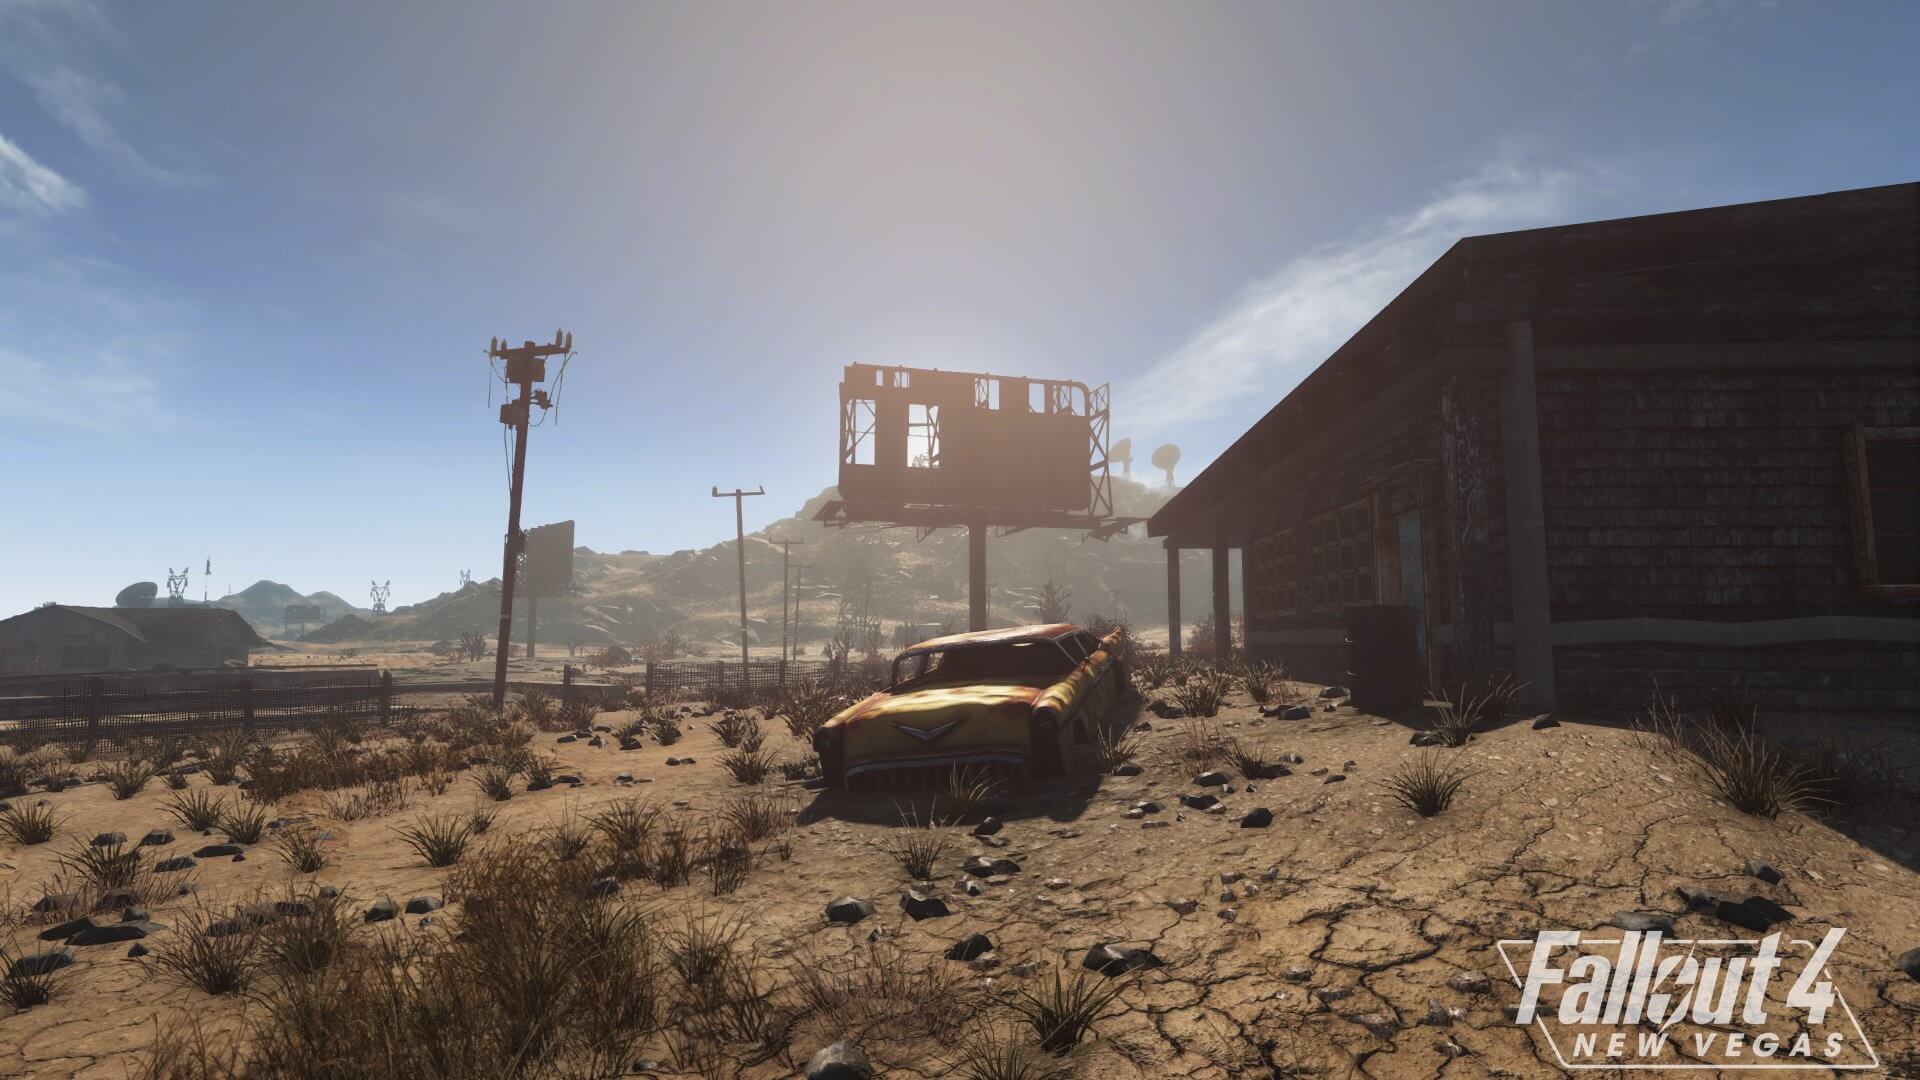 fallout new vegas with fallout 4 graphics